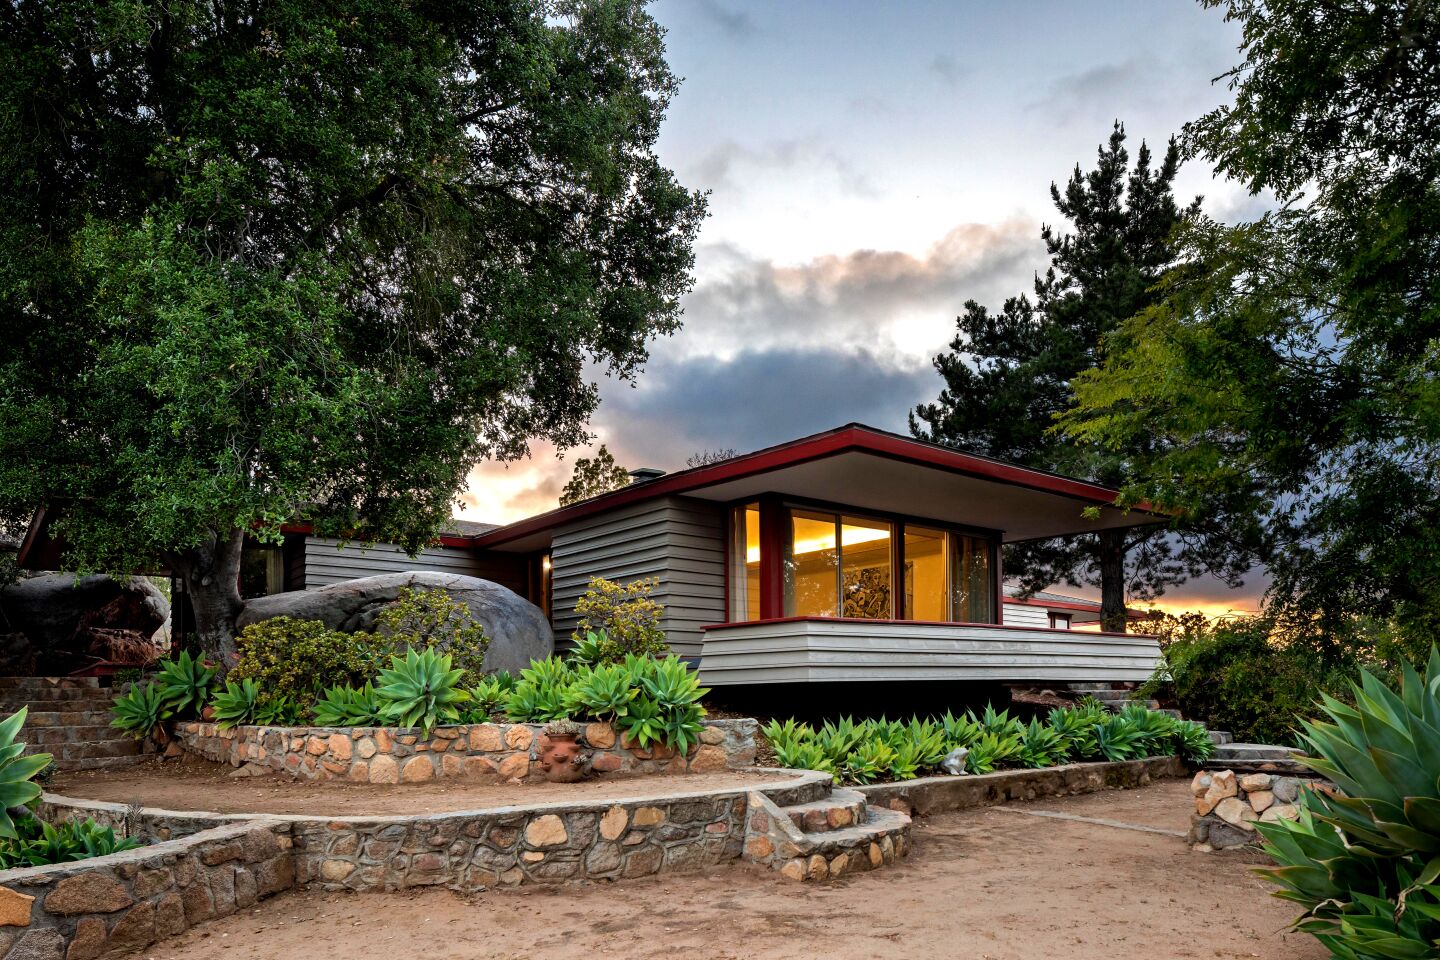 The Midcentury Modern estate in Escondido’s bucolic Hidden Meadows area is awash with original details.